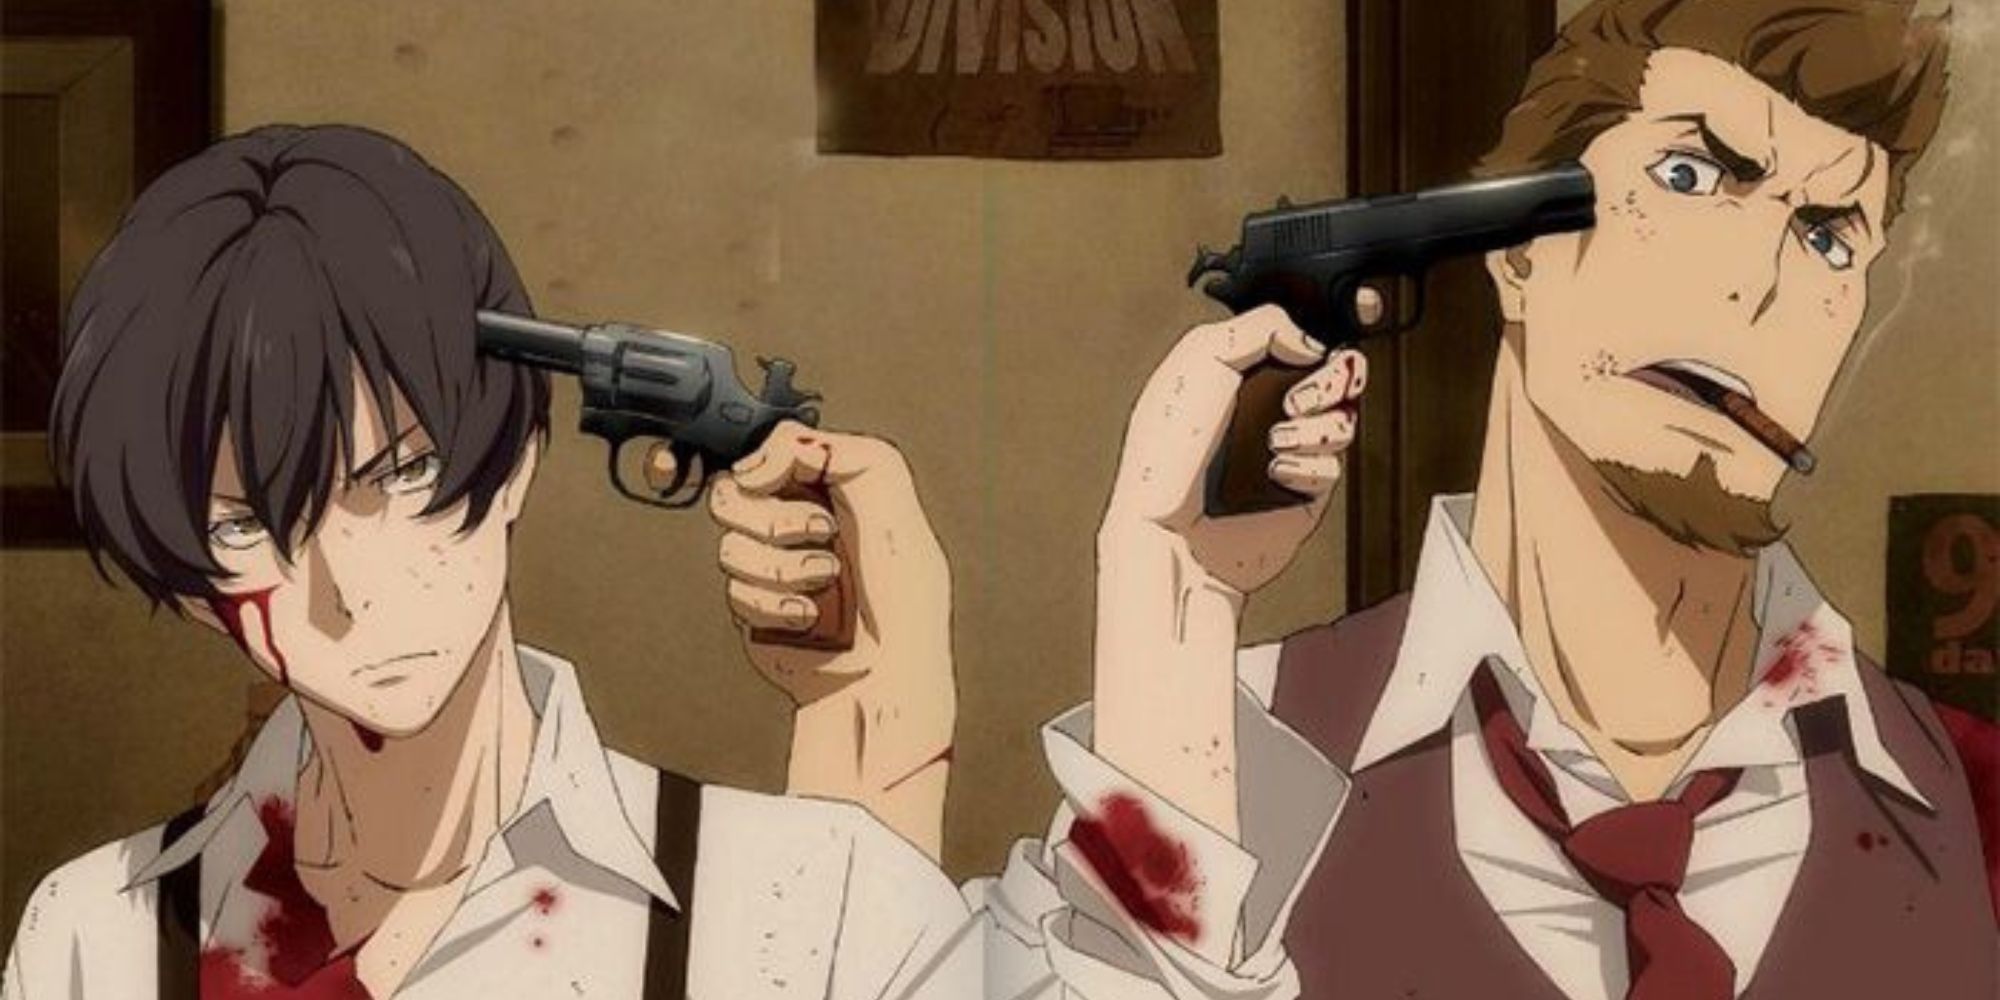 91 Days: two guys pointing guns against each other